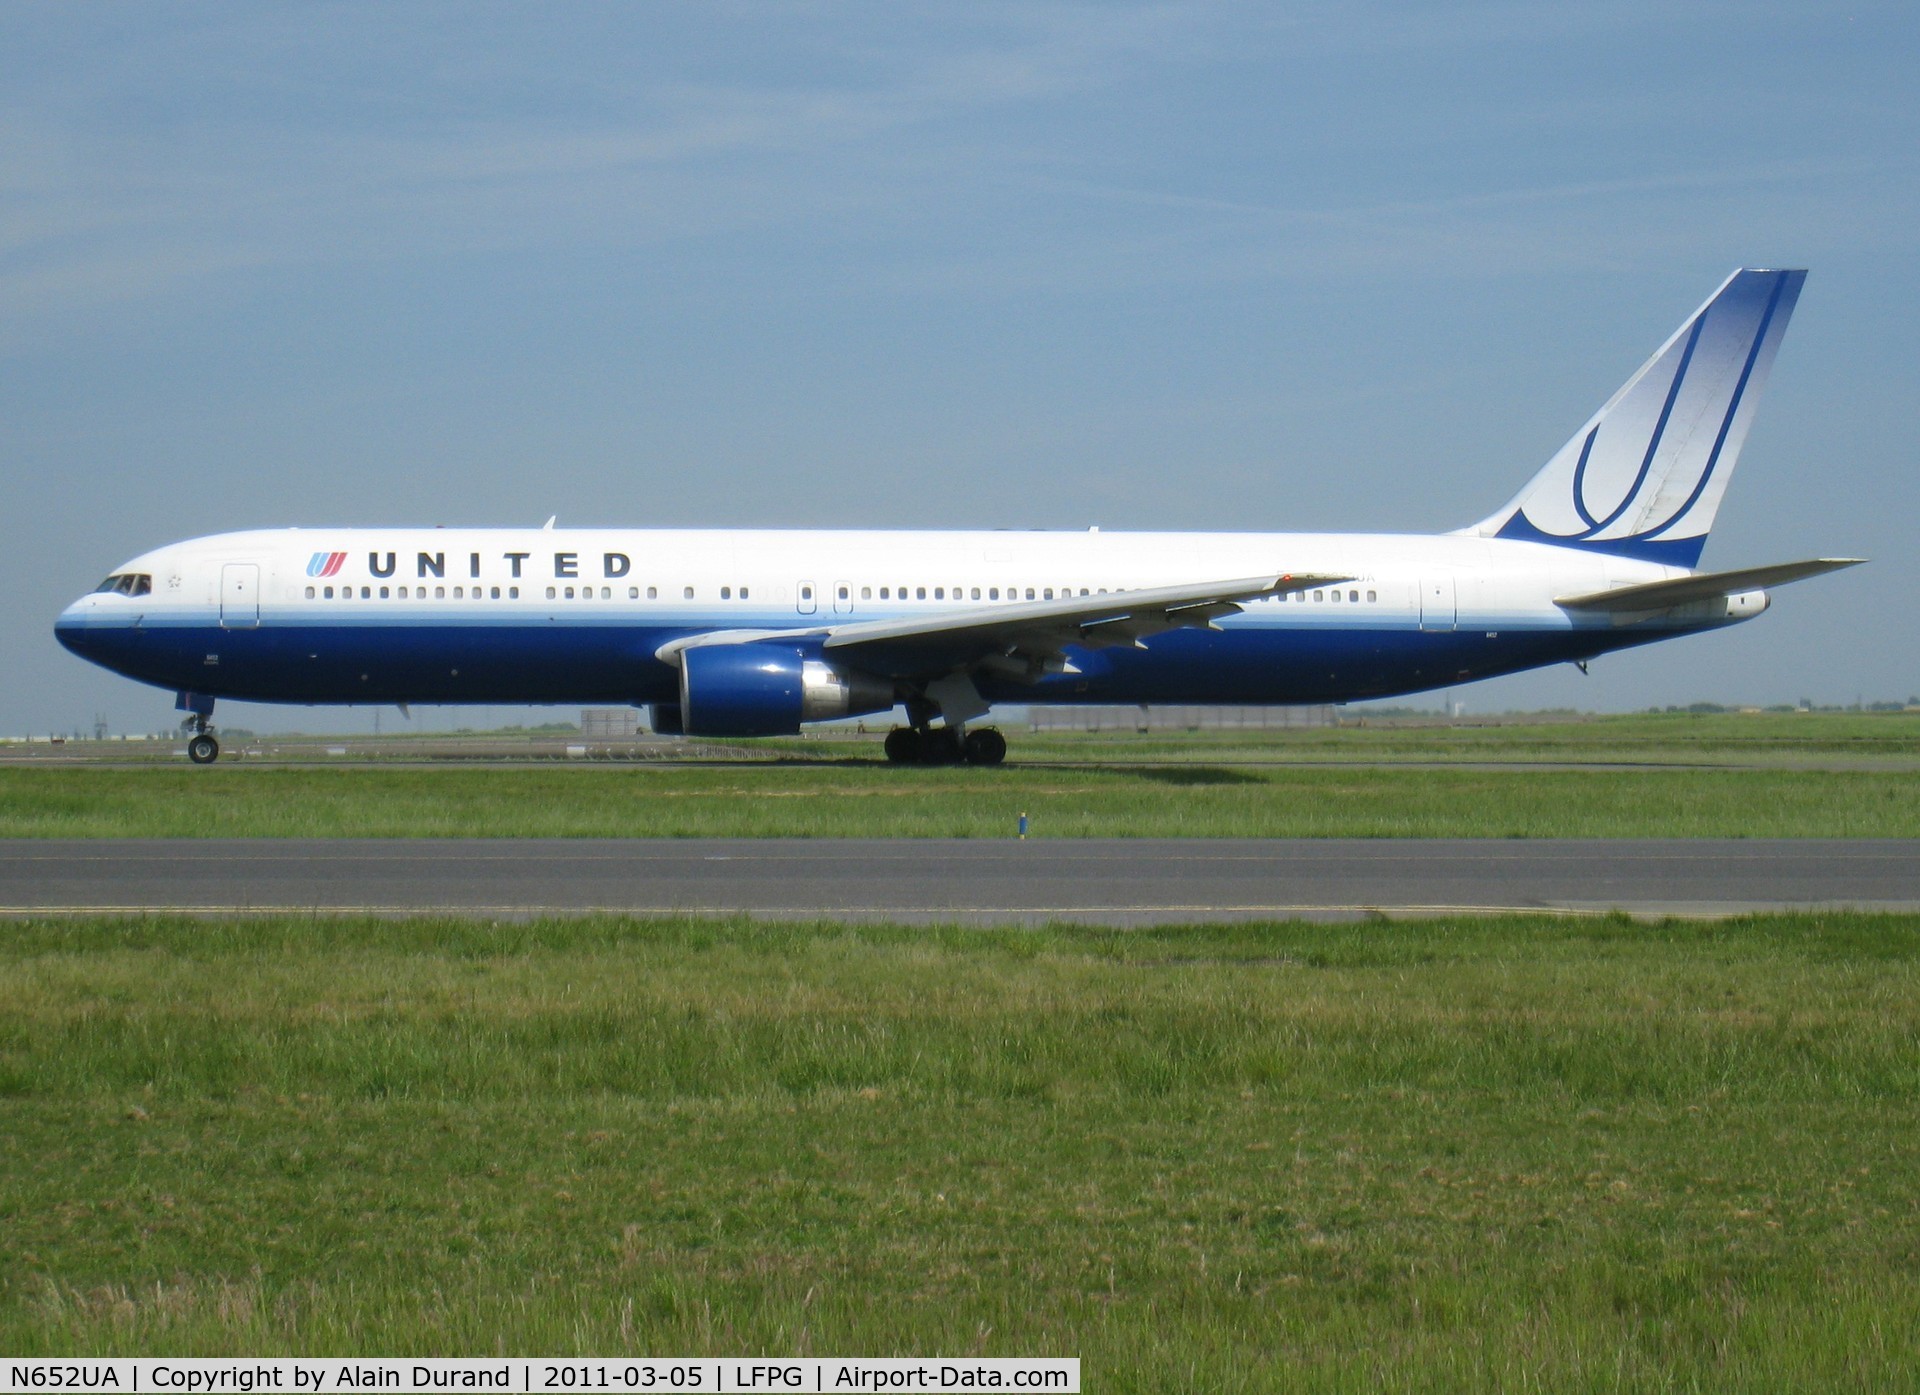 N652UA, 1992 Boeing 767-322 C/N 25390, Has recently traded this livery with the one inherited from CO 